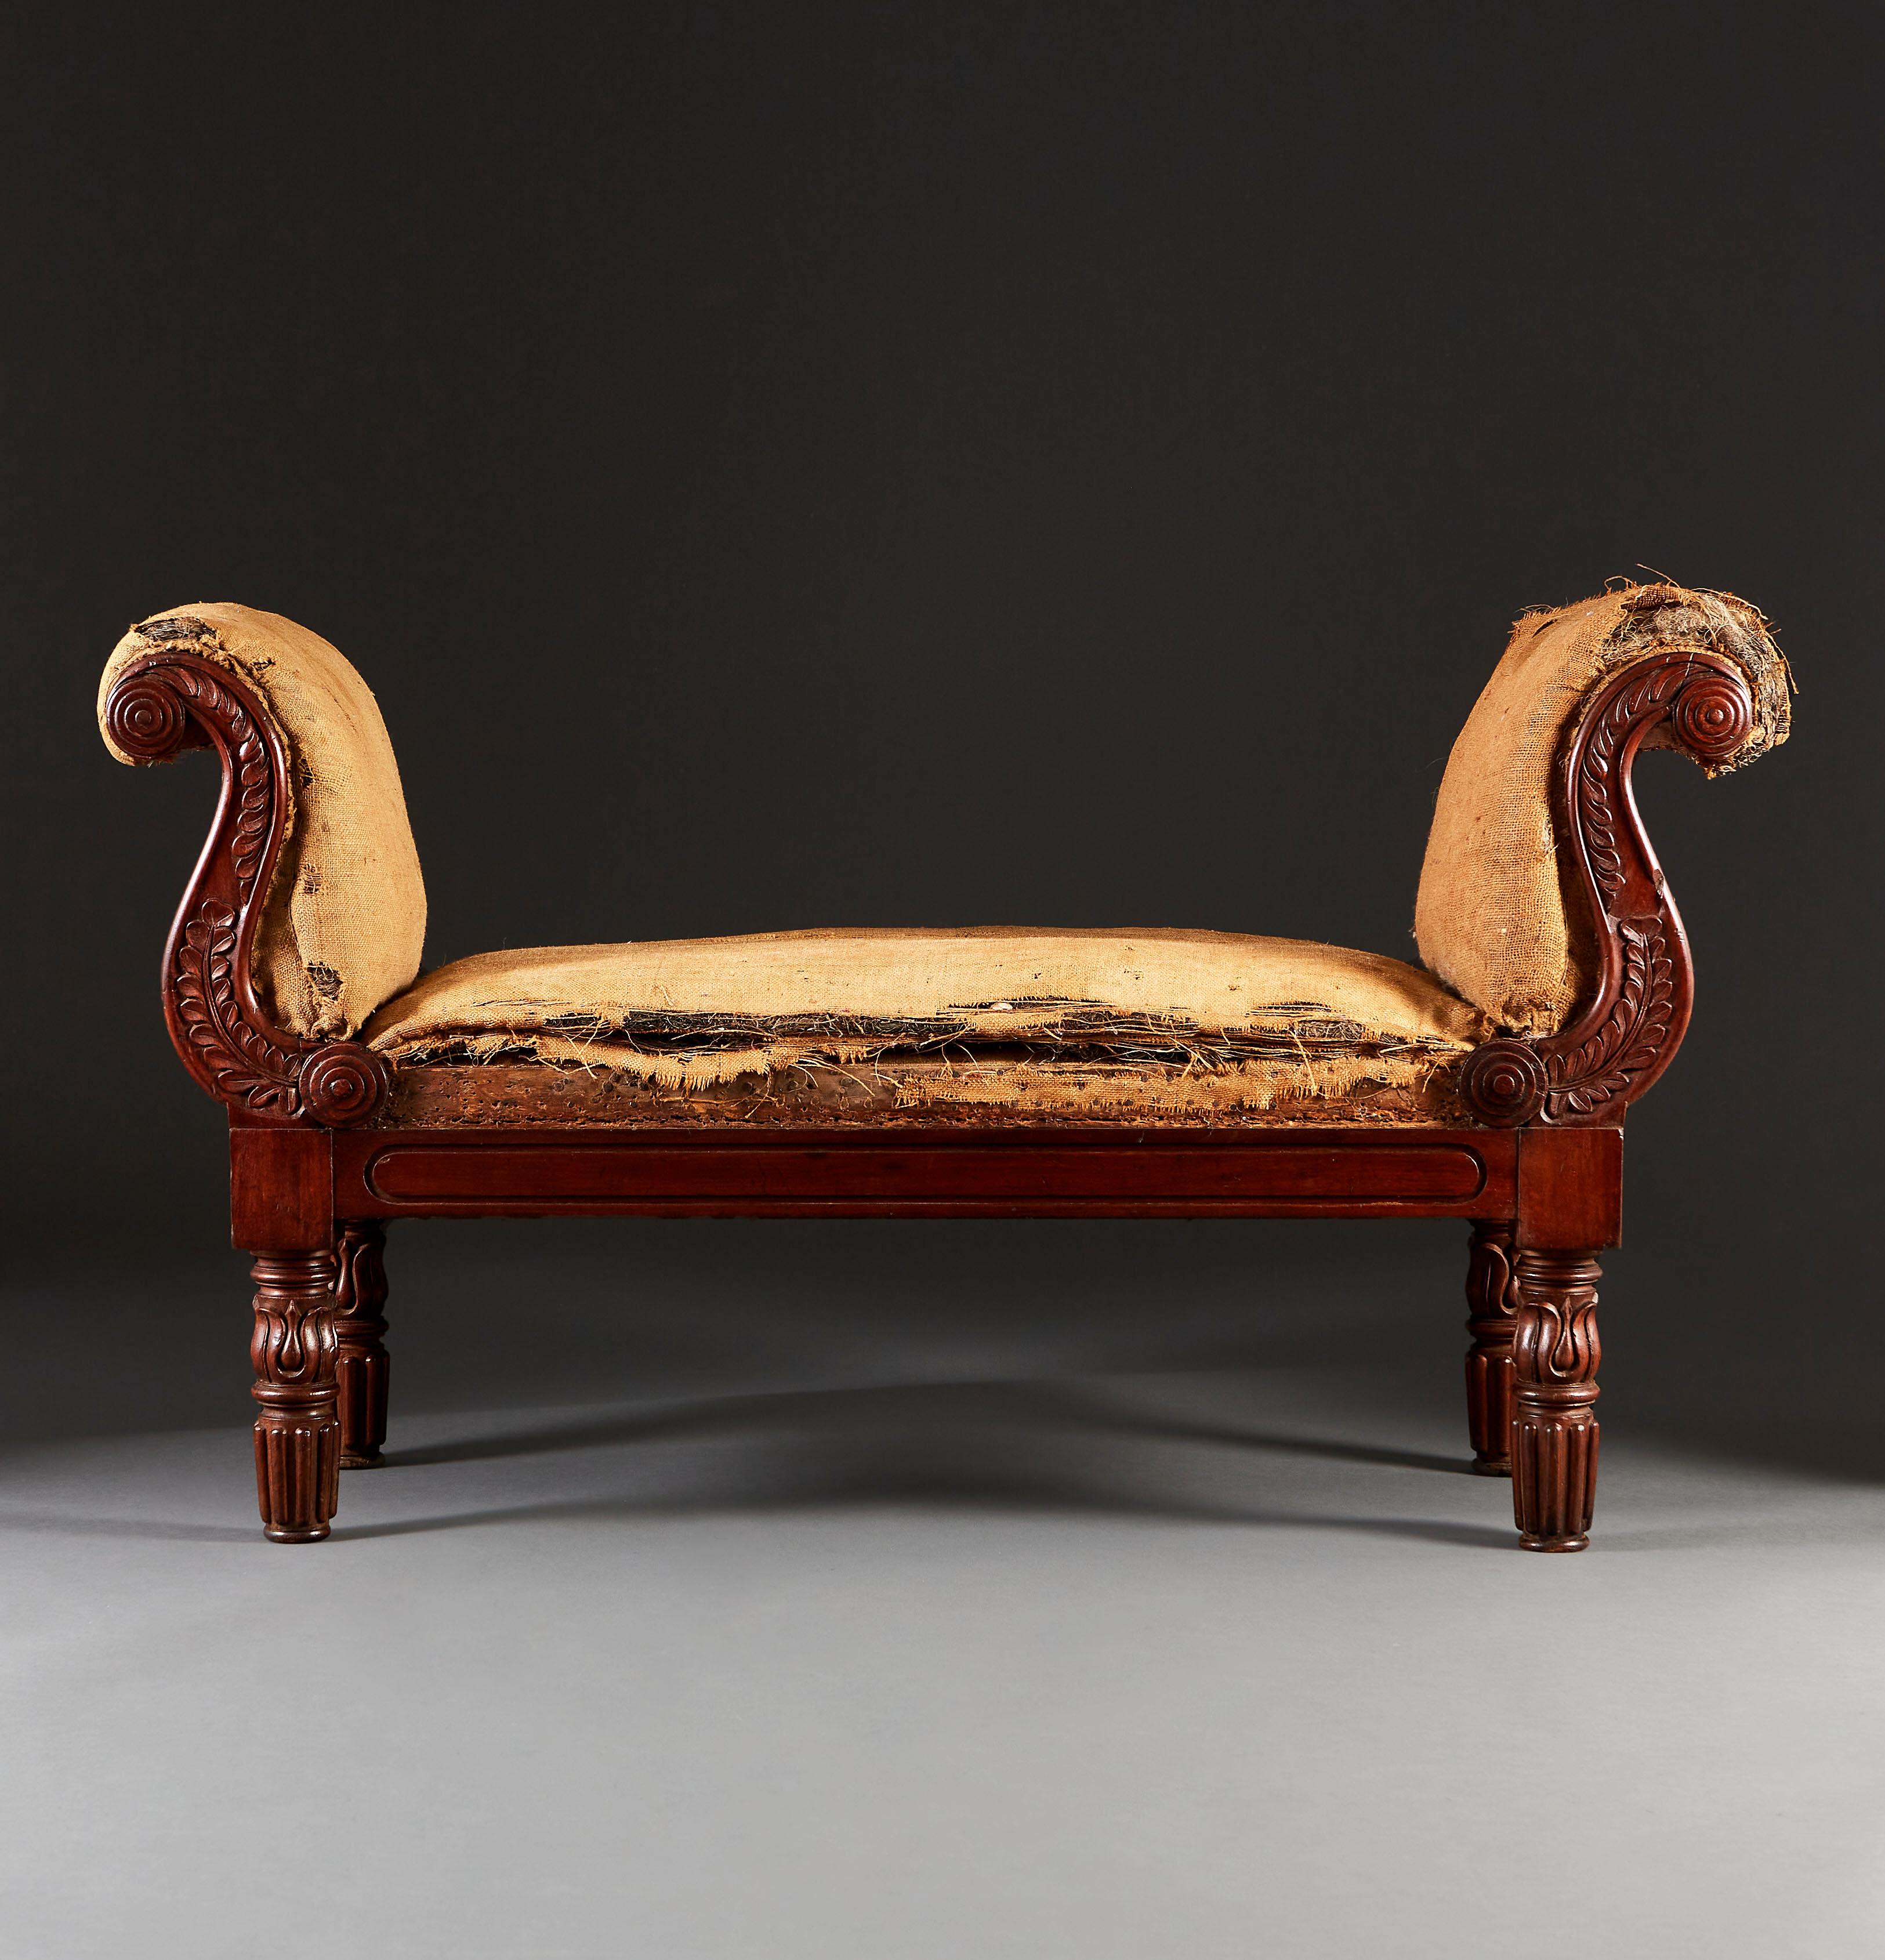 English William IV Mahogany Window Seat with Scrolling Arms For Sale